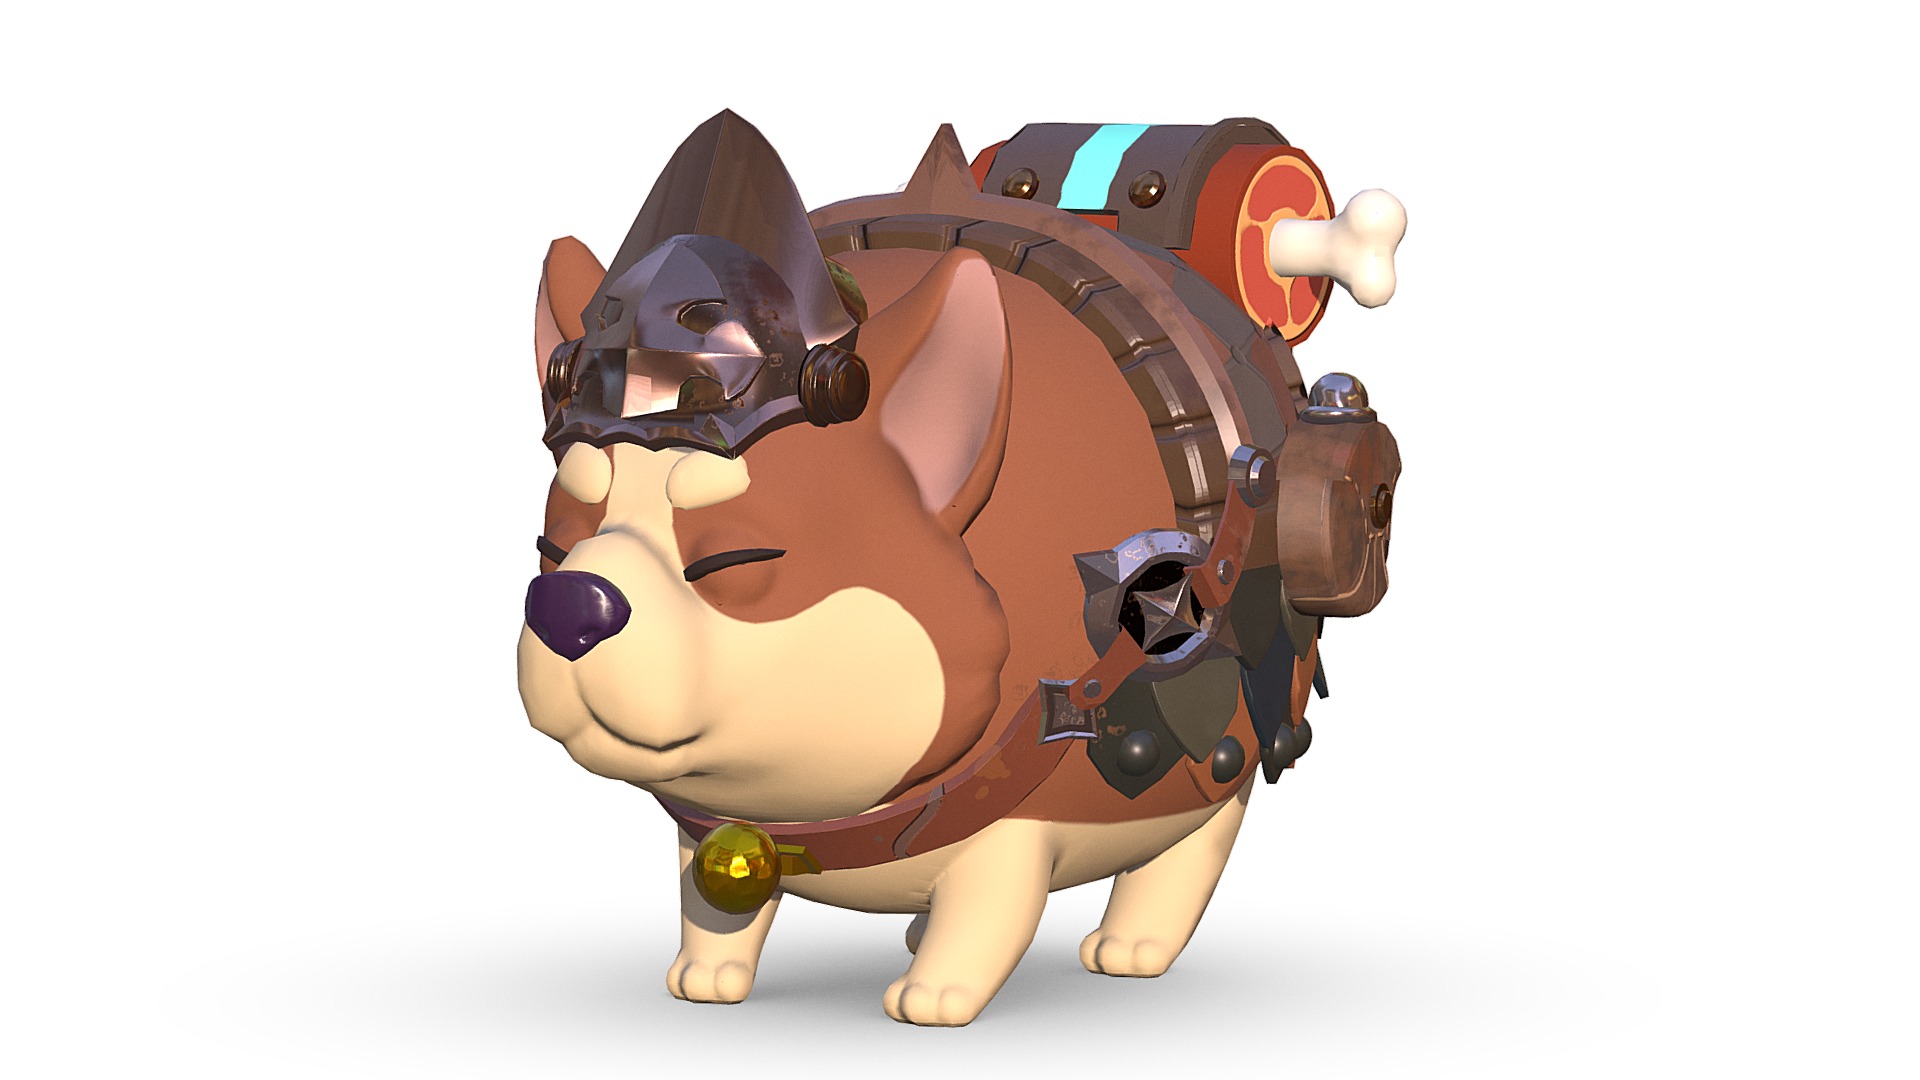 3D model Cogi - This is a 3D model of the Cogi. The 3D model is about a dog wearing a garment.